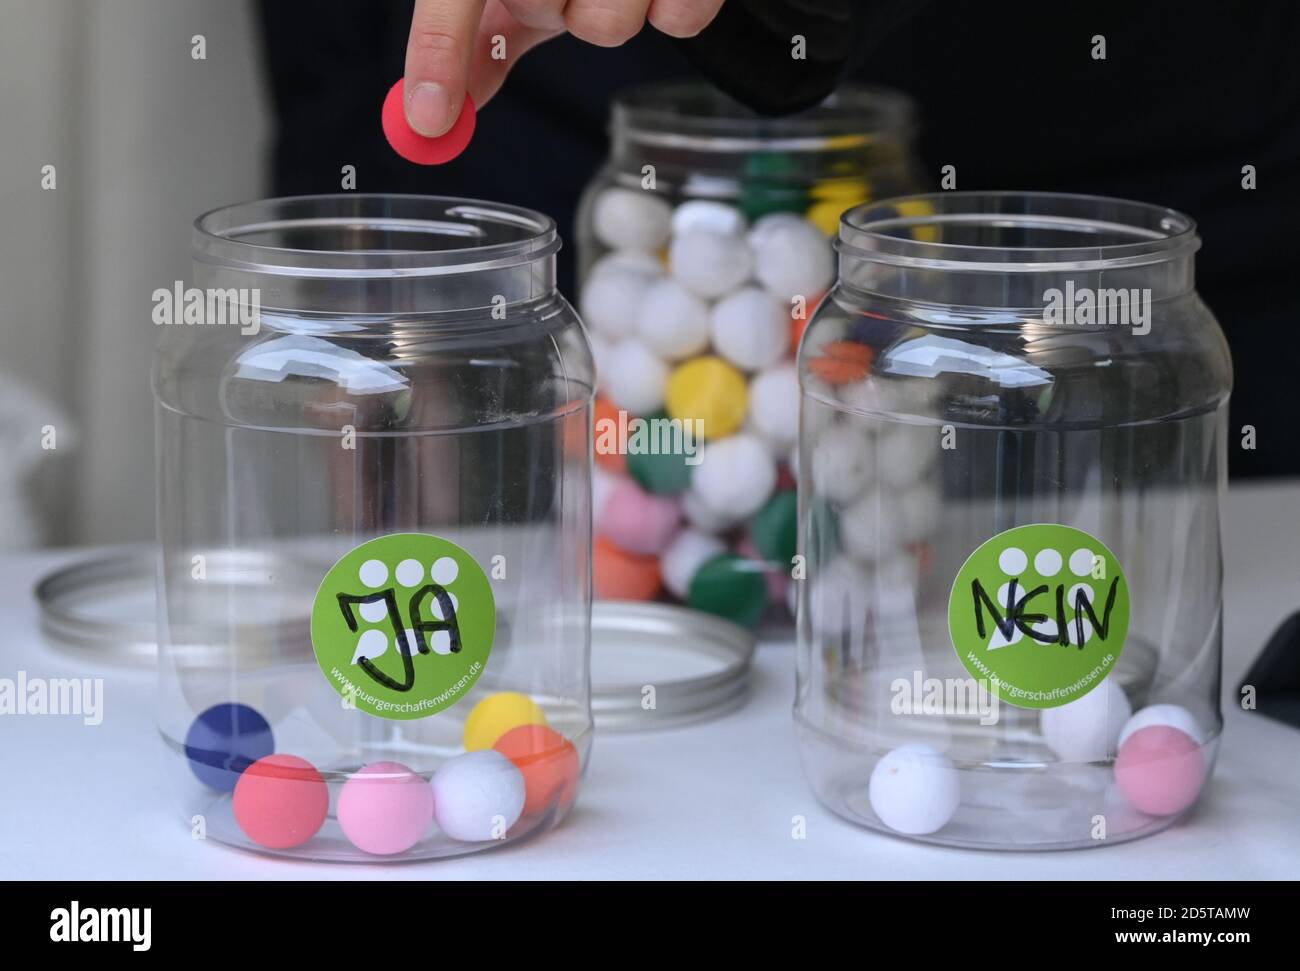 Berlin, Germany. 14th Oct, 2020. Participants in the Citizen Science Festival 'Mitforschen!' in the context of 'Bürger schaffen Wissen' at the Kulturbrauerei in Berlin can answer questions with the help of colorful spheres. The event will take place on 14 and 15 October 2020. The festival is about sustainable development. The festival offers projects the opportunity to introduce themselves and invite people to join in the research. Credit: Jens Kalaene/dpa-Zentralbild/ZB/dpa/Alamy Live News Stock Photo